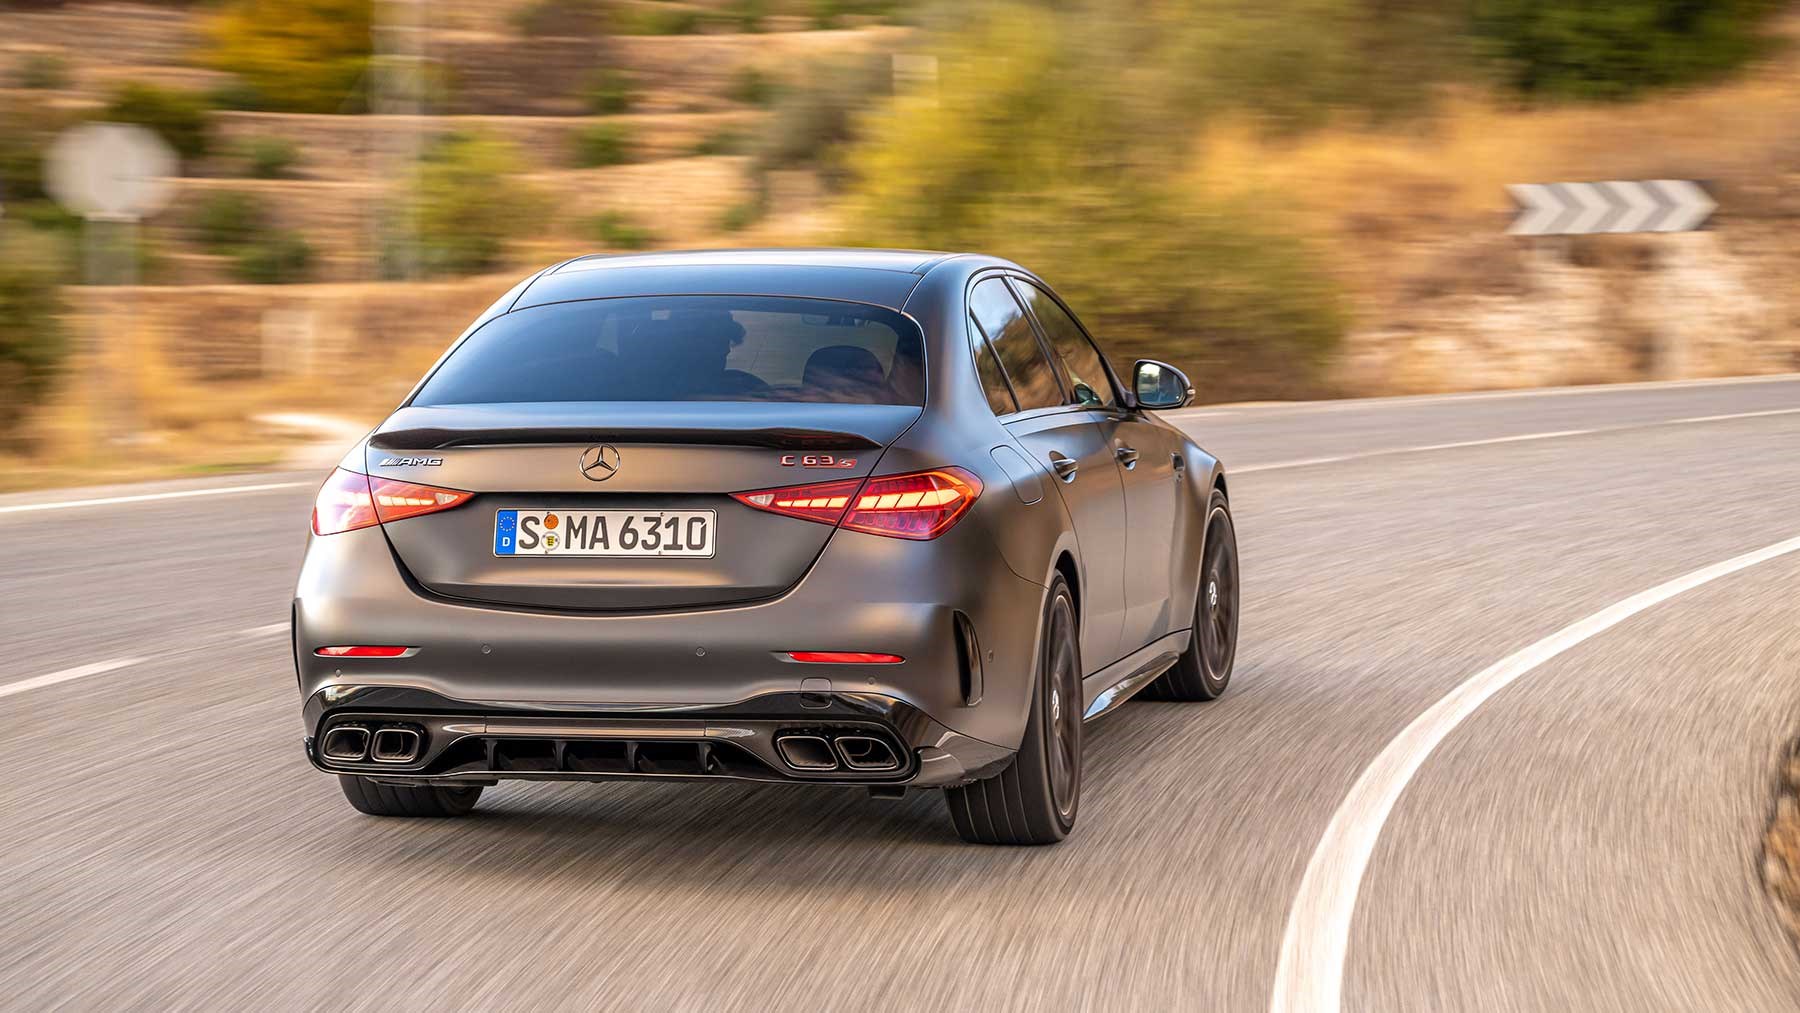 Six things we learned riding in the new 670bhp Mercedes-AMG C63